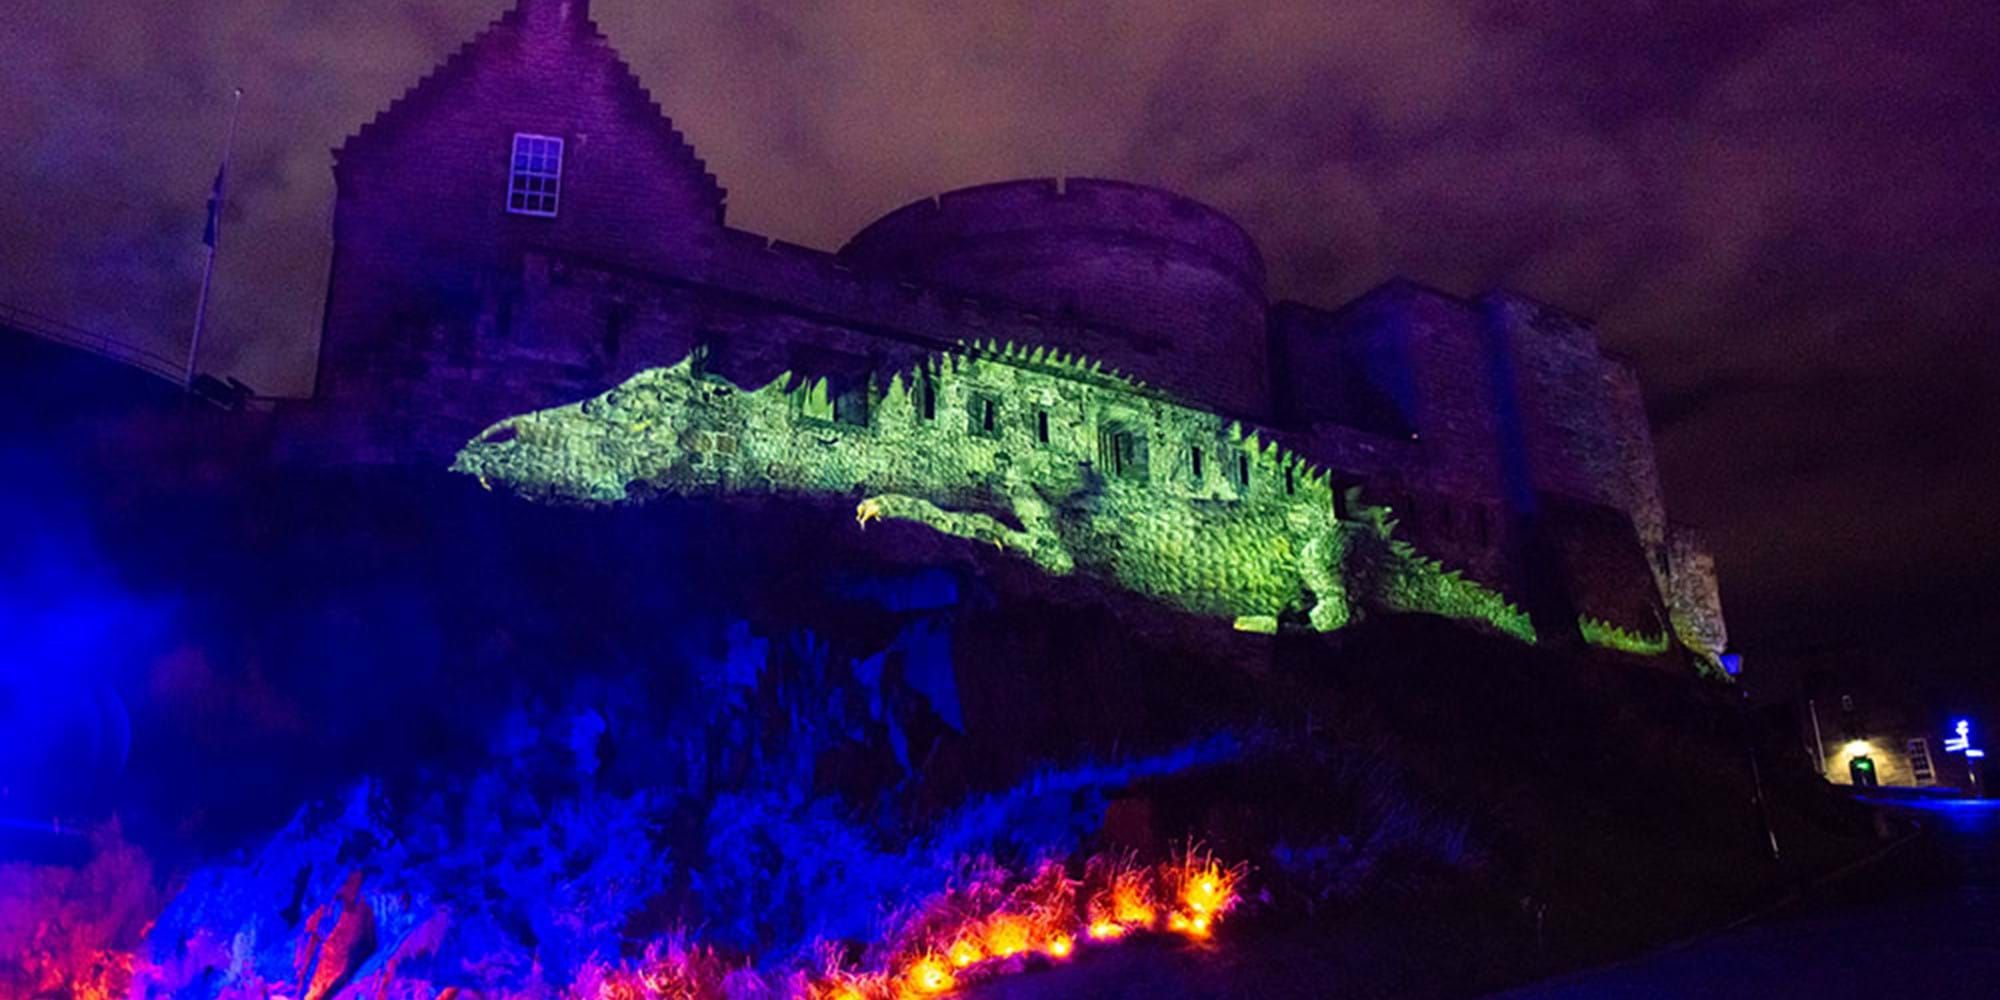 Castle with light projected in colour onto the castle walls